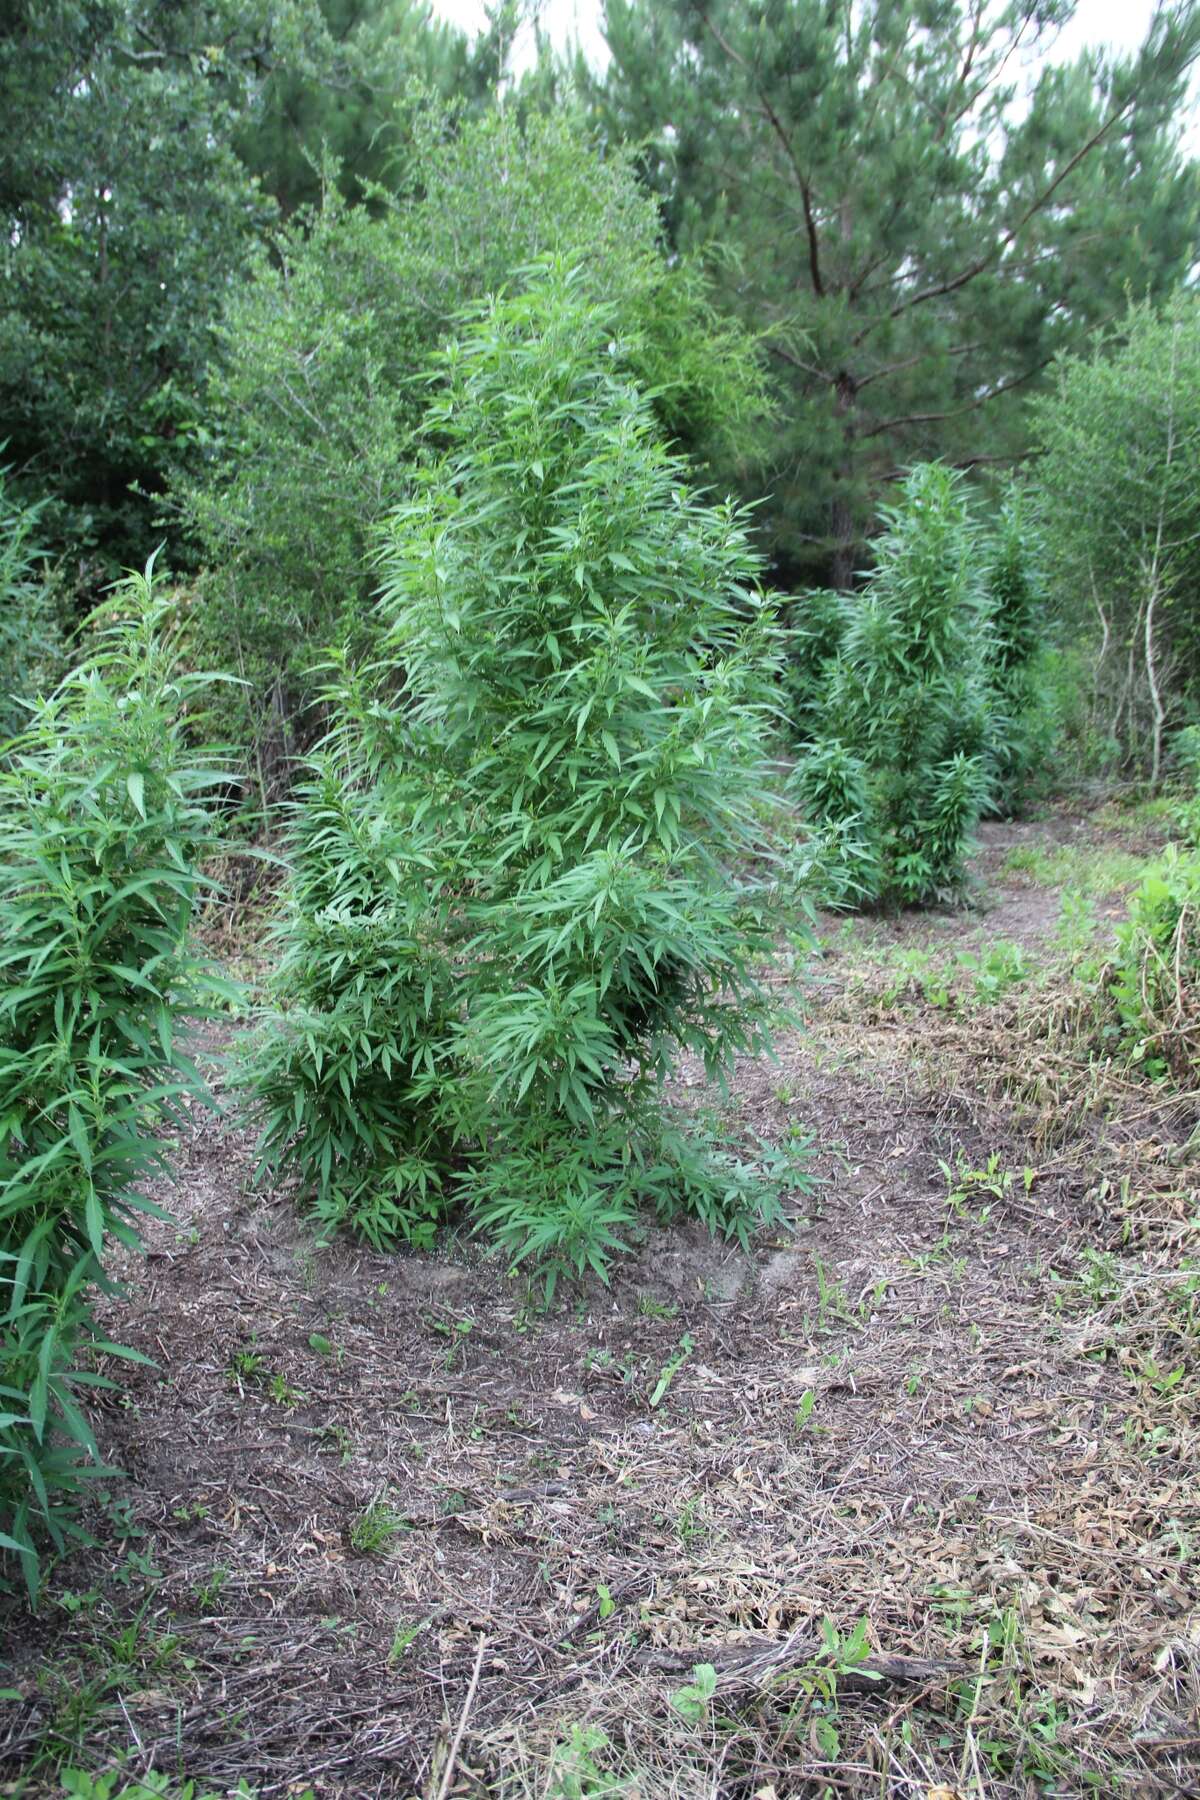 Sheriff's deputies found this marijuana farm - with thousands of plants and an estimated value of $7.9 million - in Walker County on Friday, June 9, 2017. (Courtesy of Walker County Sheriff's Office)